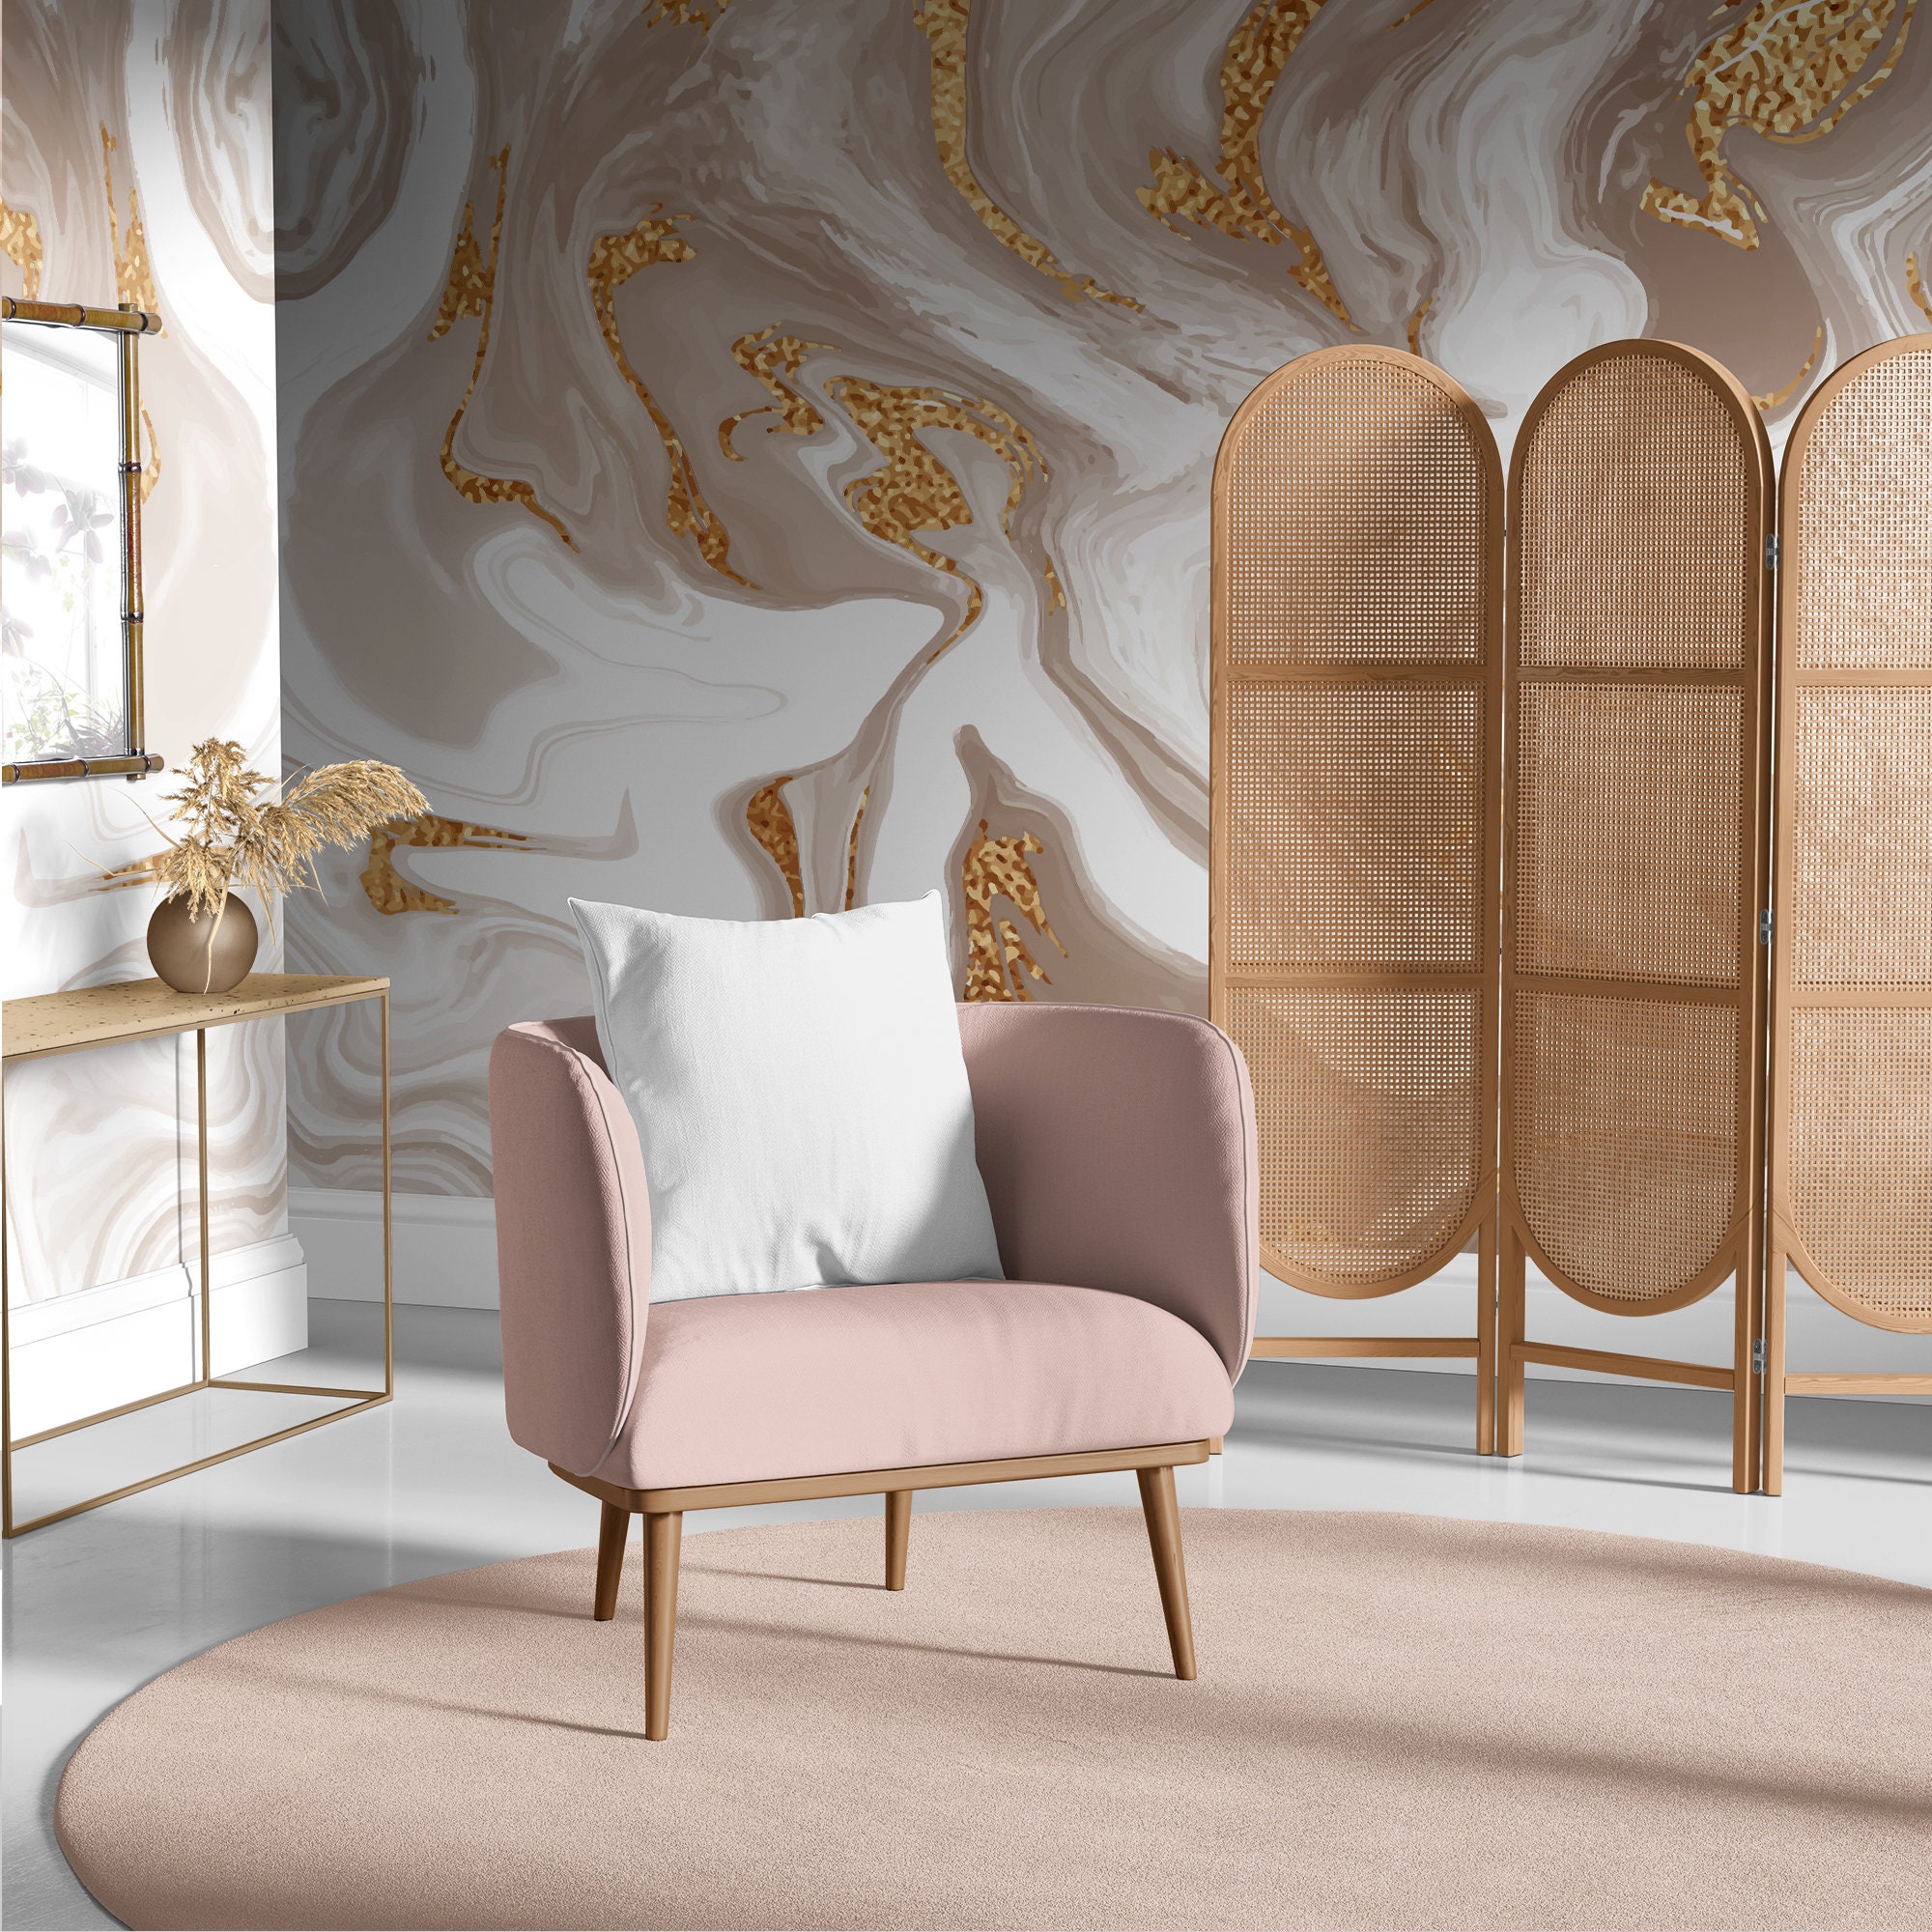 The Design Library  Vasari Marble CreamGold Wallpaper  529425   WonderWall by Nobletts